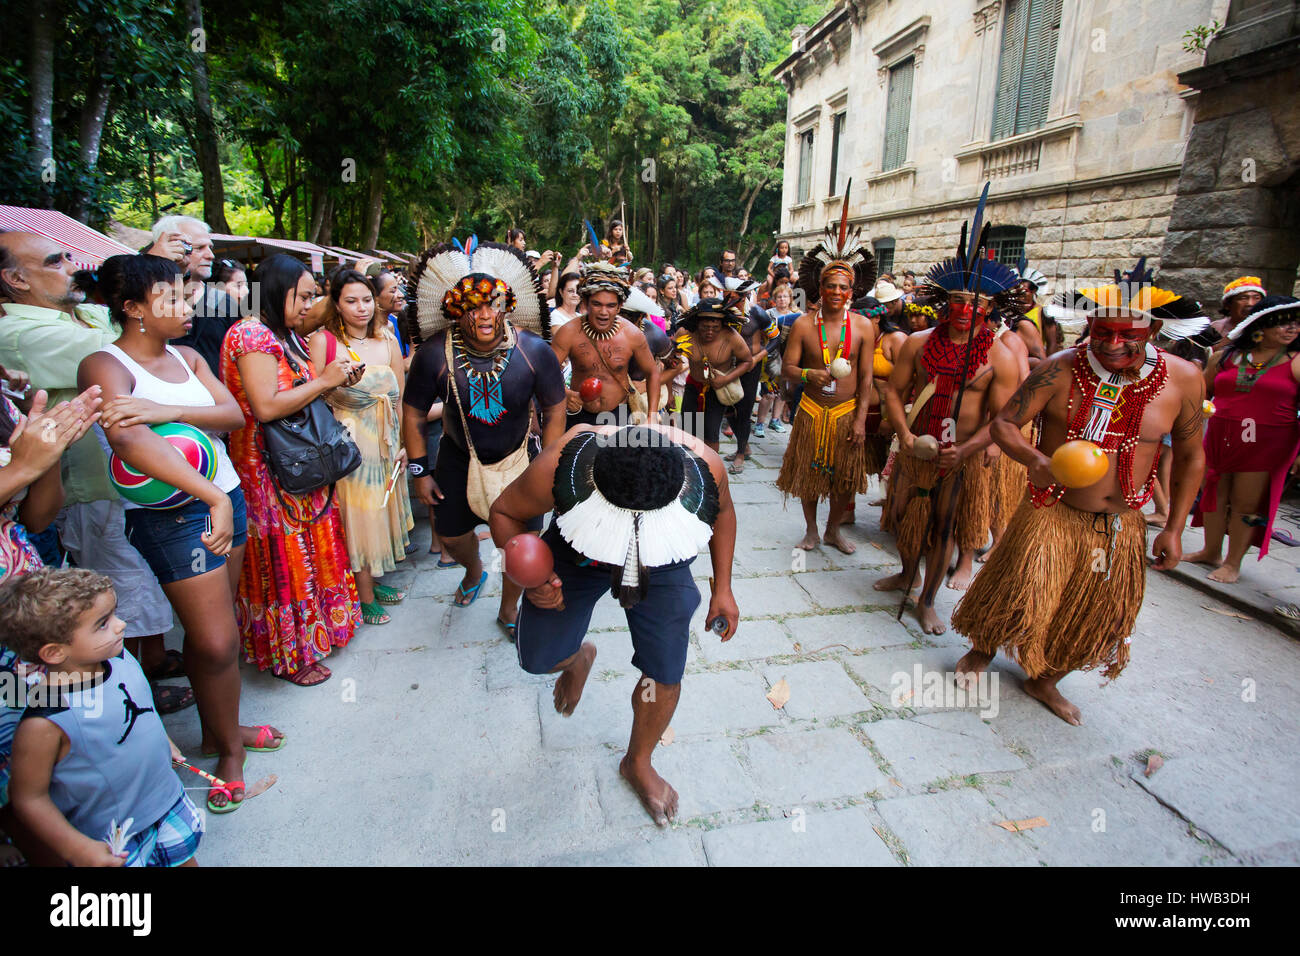 In the Indian day indians doing presentation dance to the public at Parque Lage, Rio de Janeiro, Brazil Stock Photo